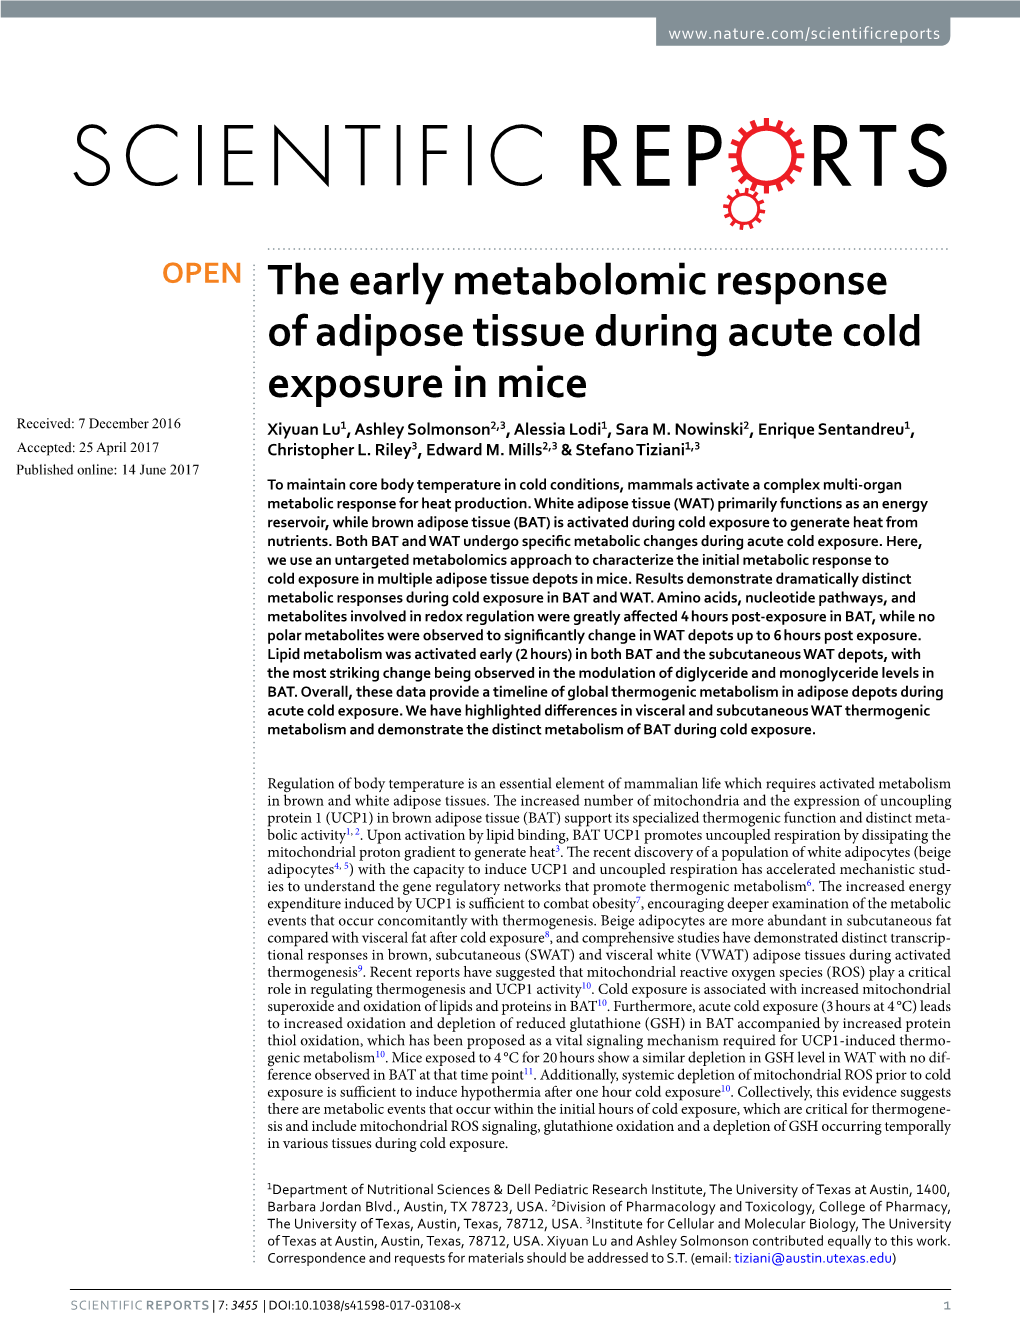 The Early Metabolomic Response of Adipose Tissue During Acute Cold Exposure in Mice Received: 7 December 2016 Xiyuan Lu1, Ashley Solmonson2,3, Alessia Lodi1, Sara M